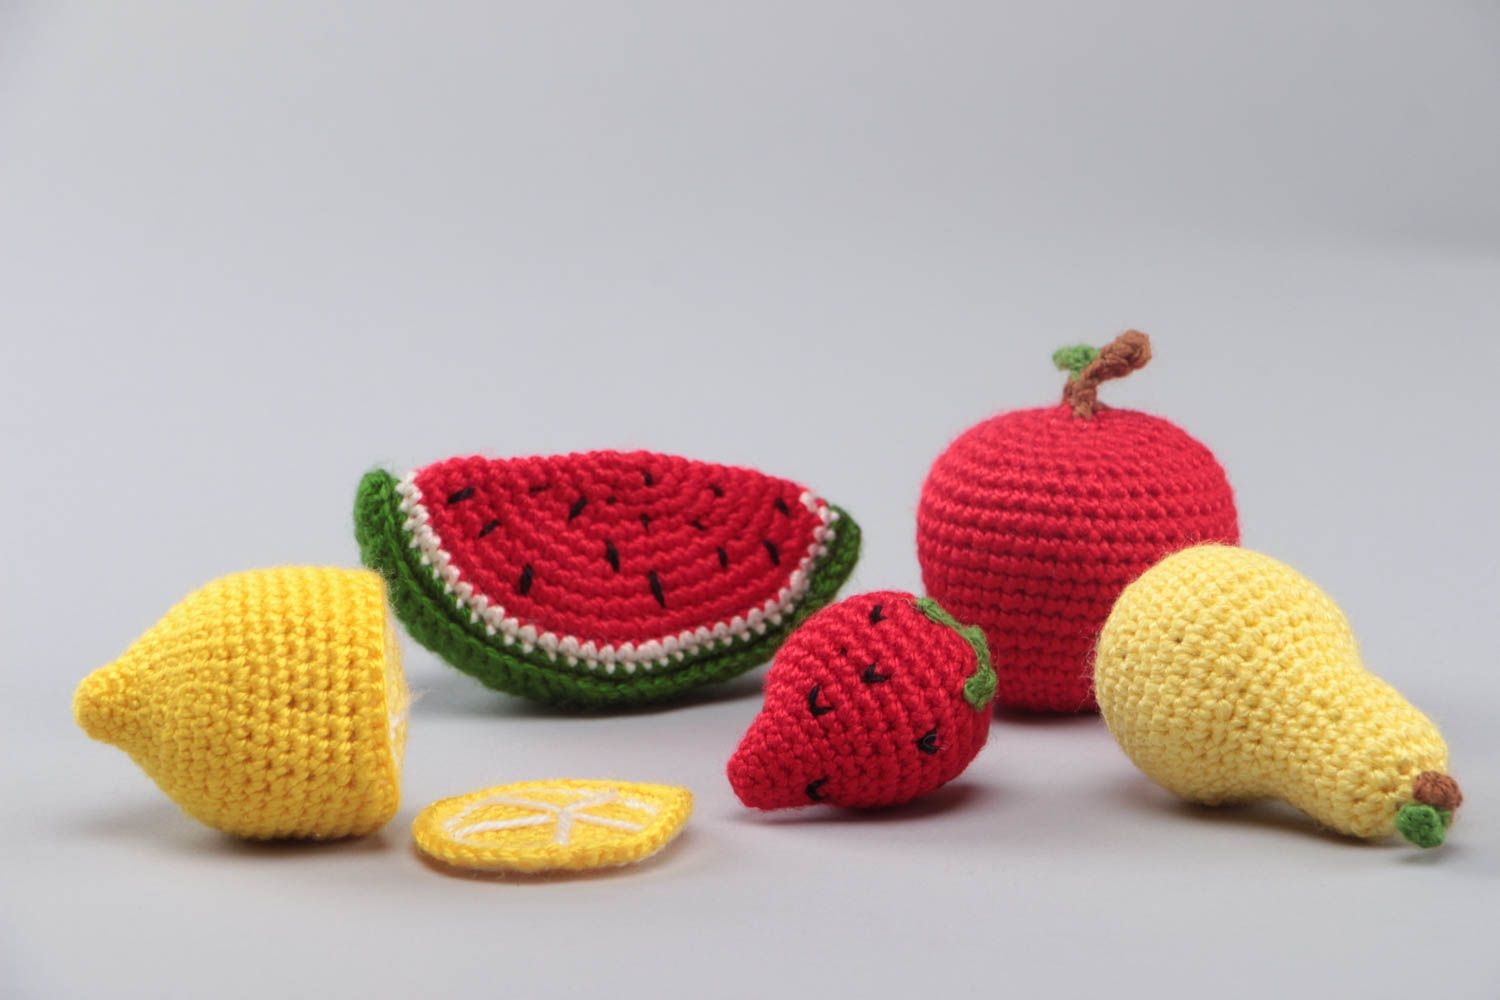 Set of 6 handmade crocheted soft colorful fruit toys for kids and interior decor photo 3